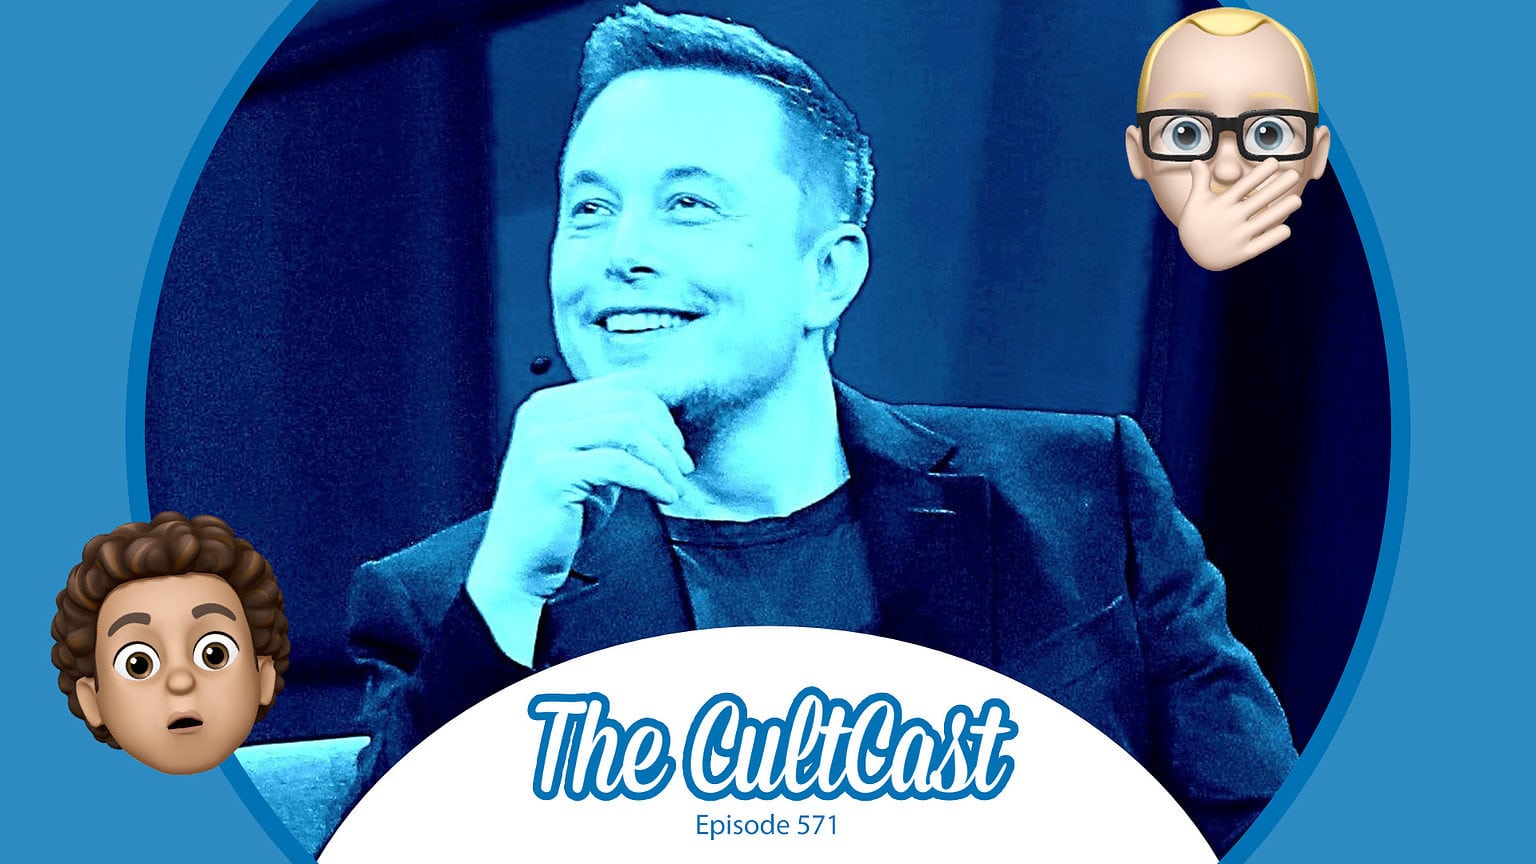 Elon Musk versus Apple on The CultCast podcast: Well, that escalated quickly!